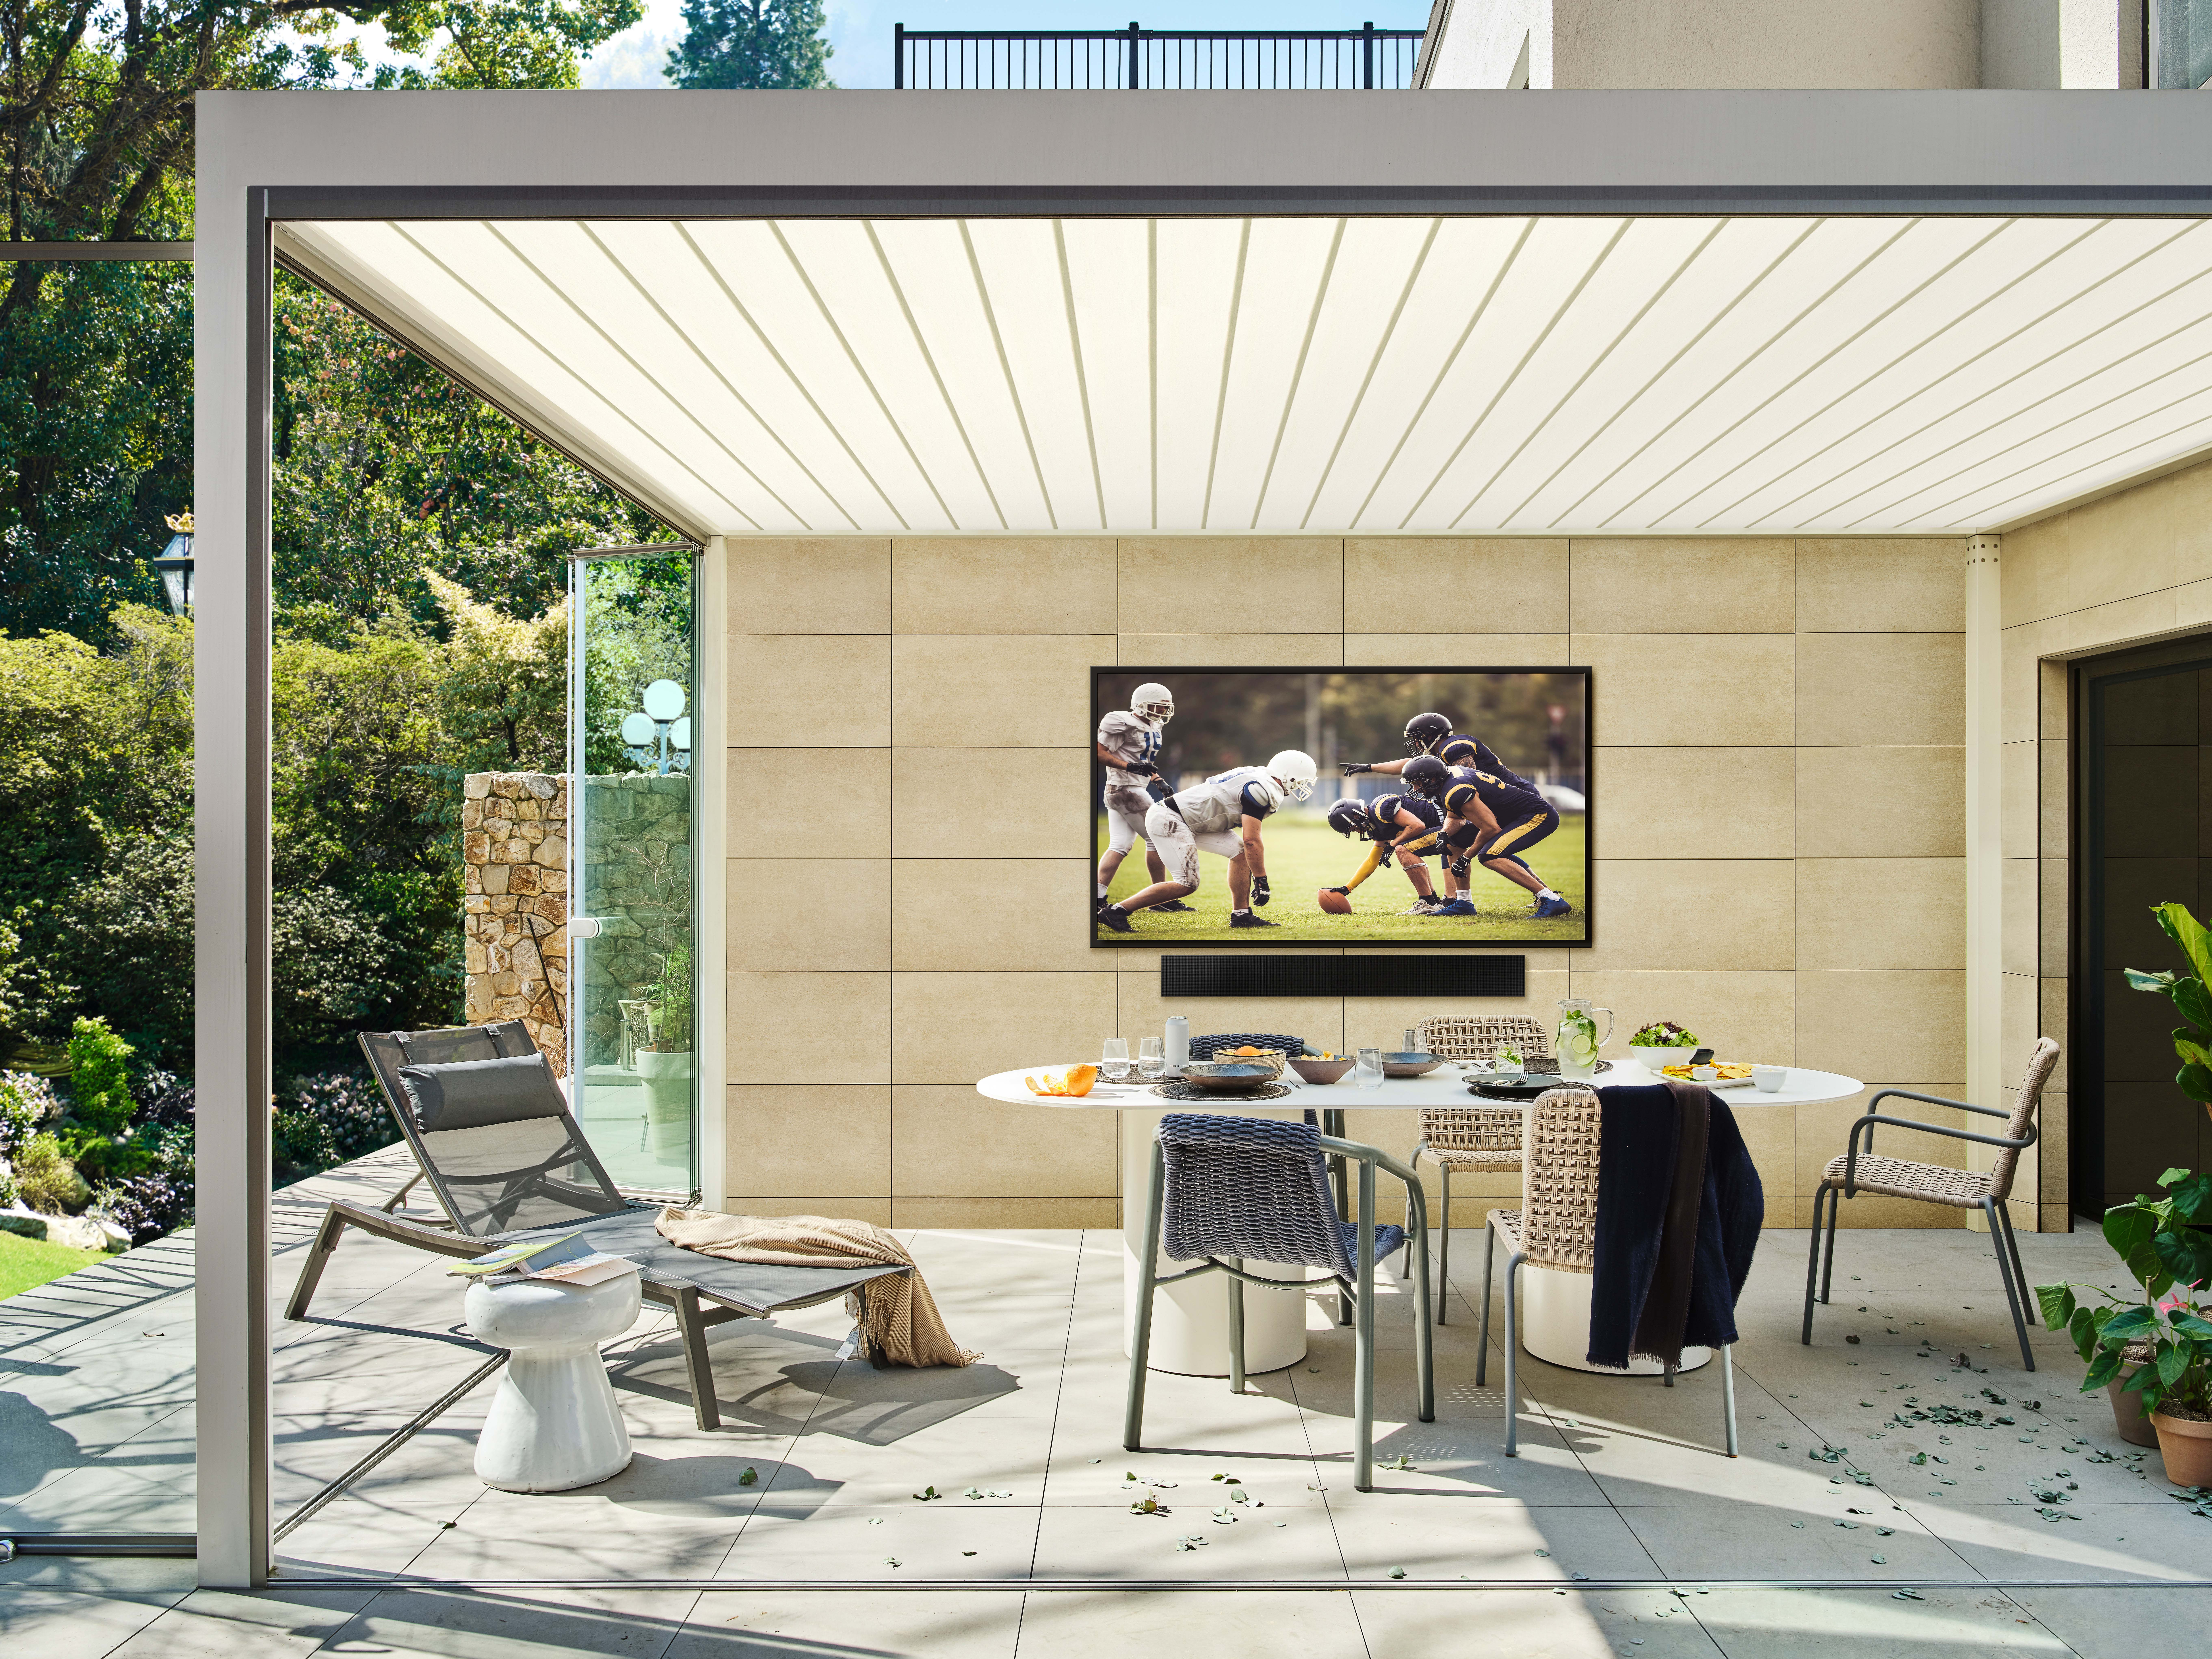 Samsung Terrace 85-inch Lifestyle